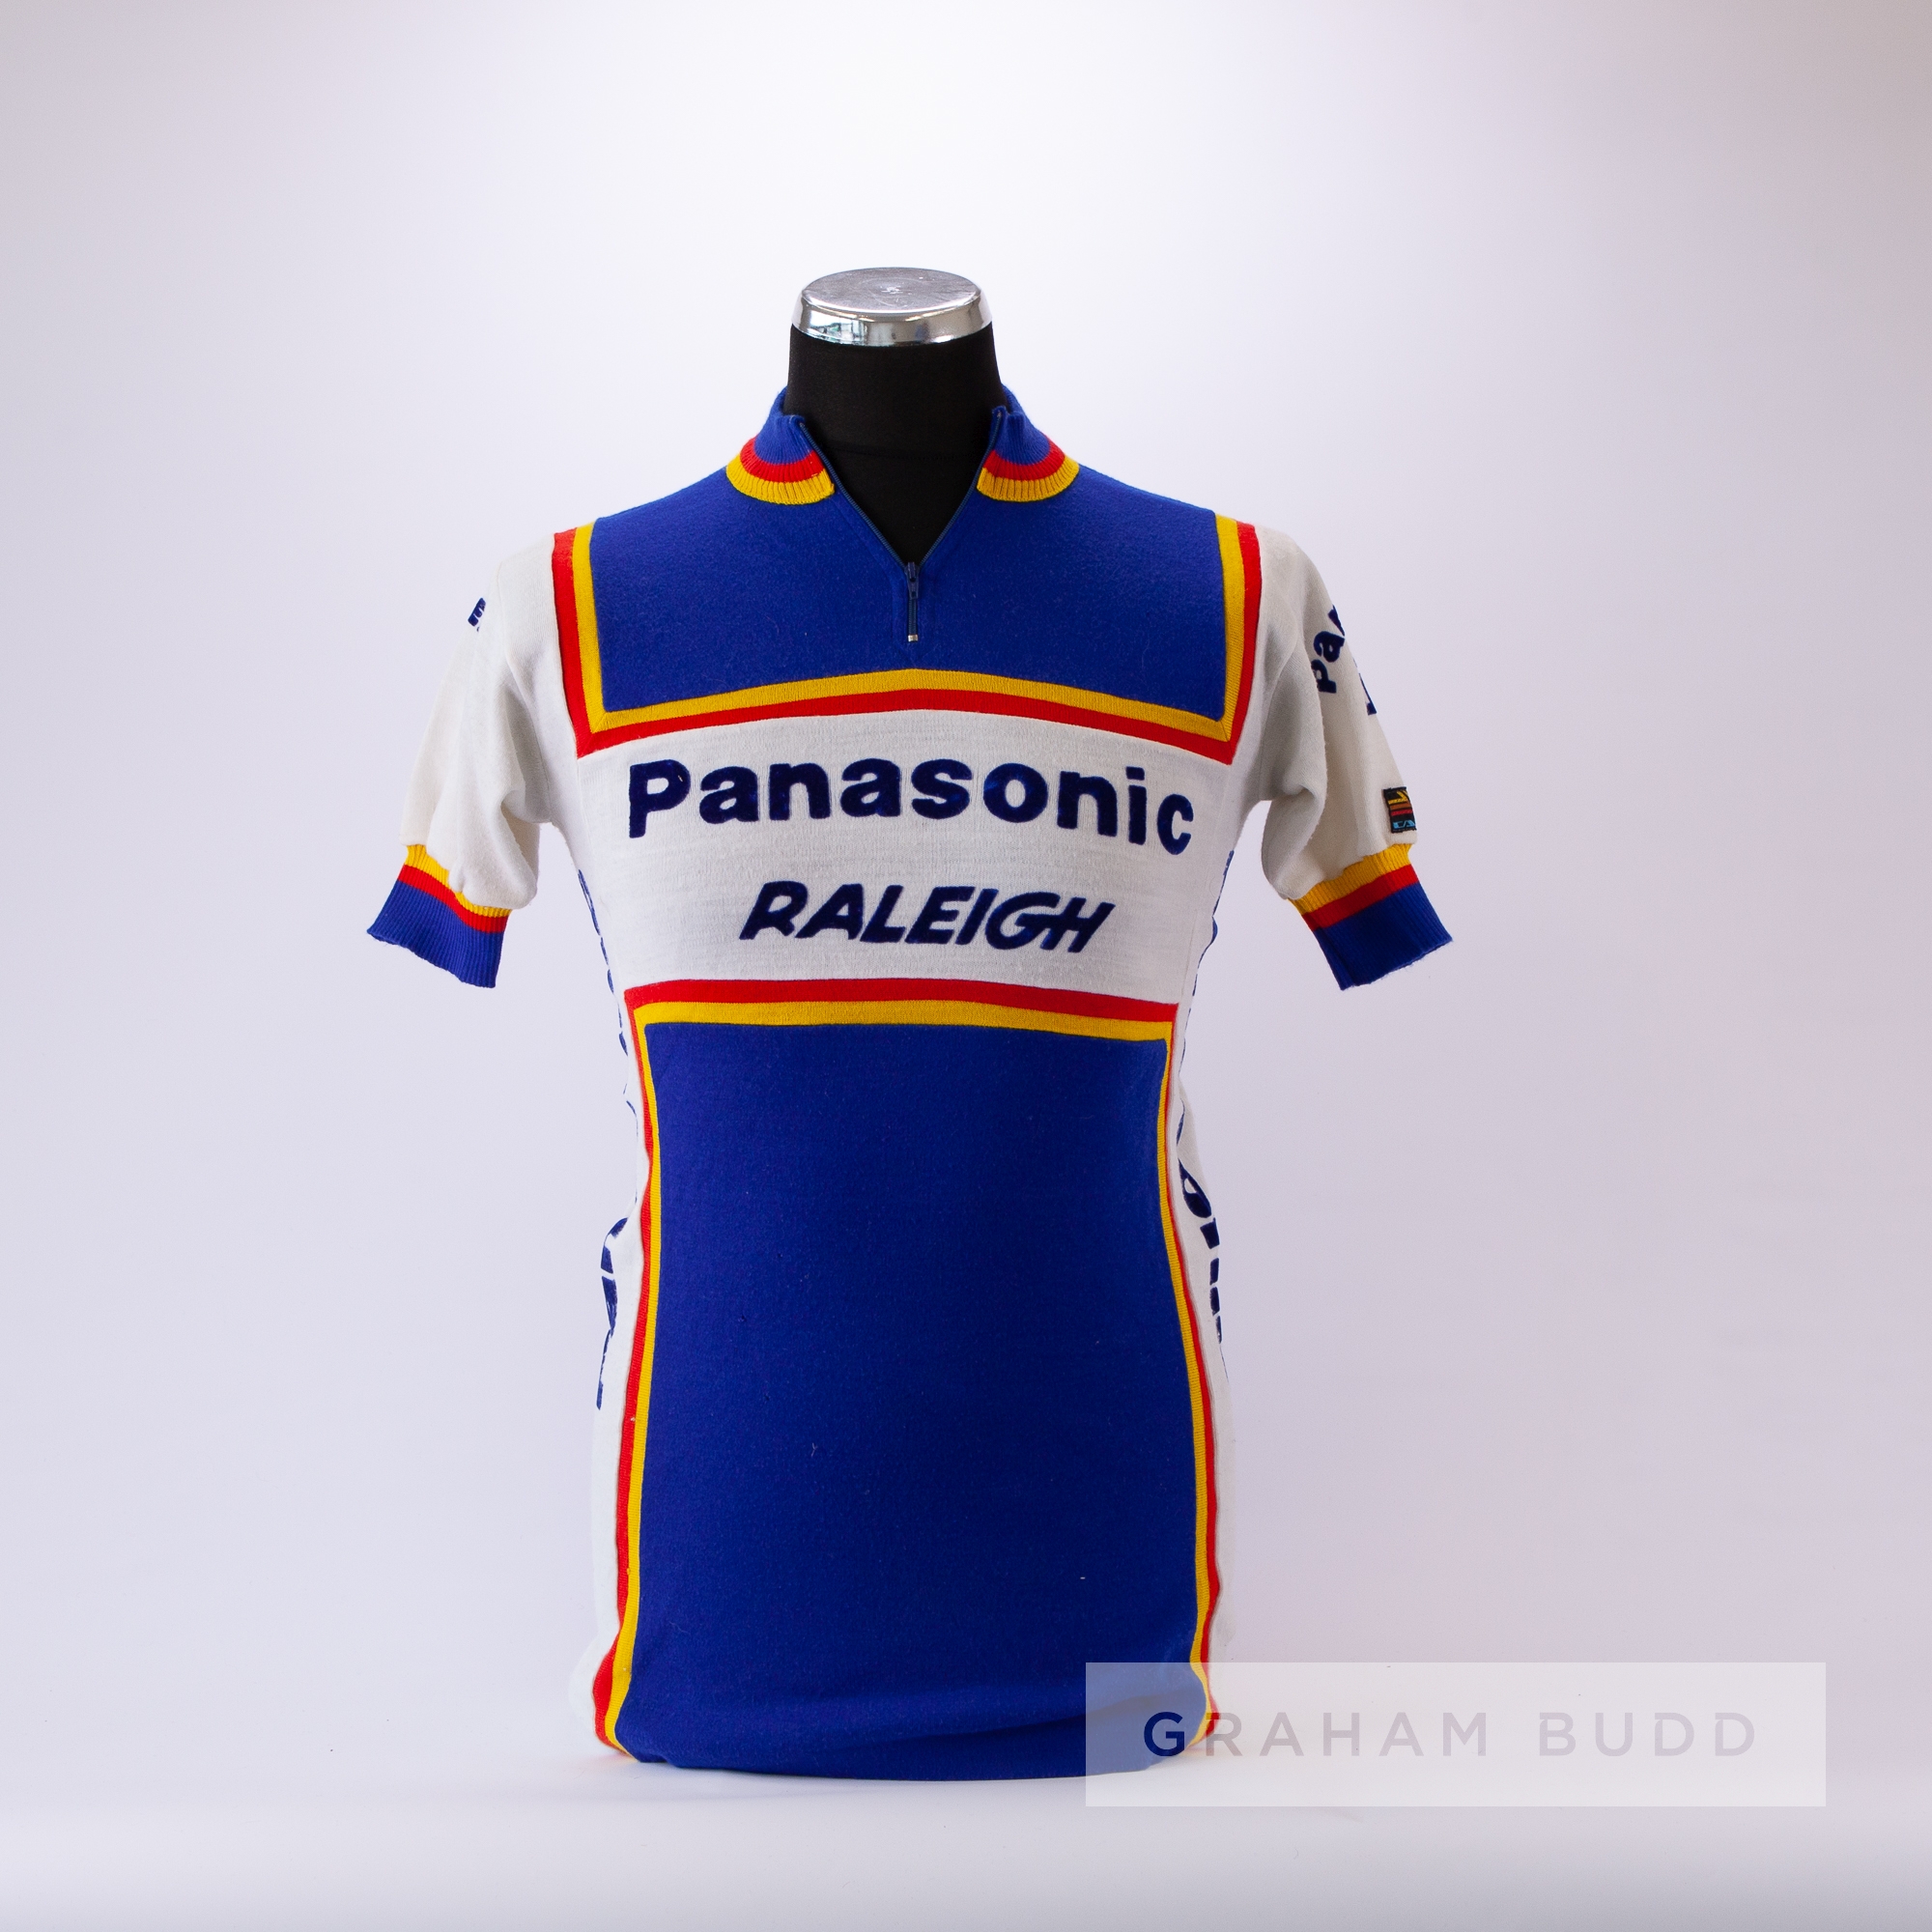 1984 blue, yellow, red and white Panasonic Raleigh Cycling race jersey, scarce, acrylic short- - Image 3 of 4